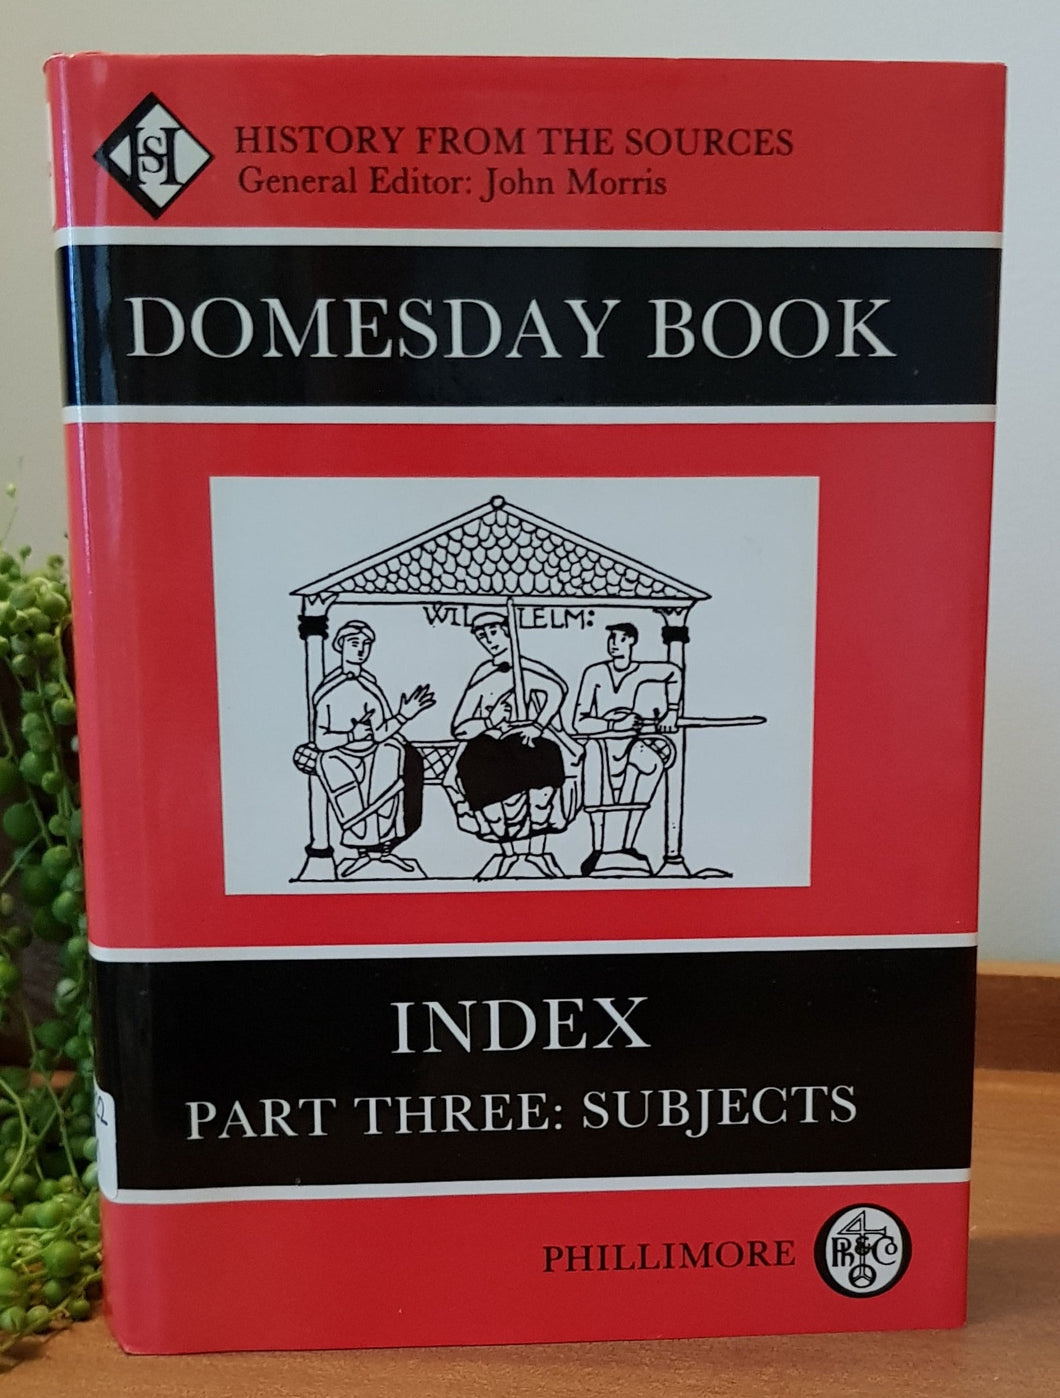 Domesday Book: Vol 38 Index of Subjects by John Morris